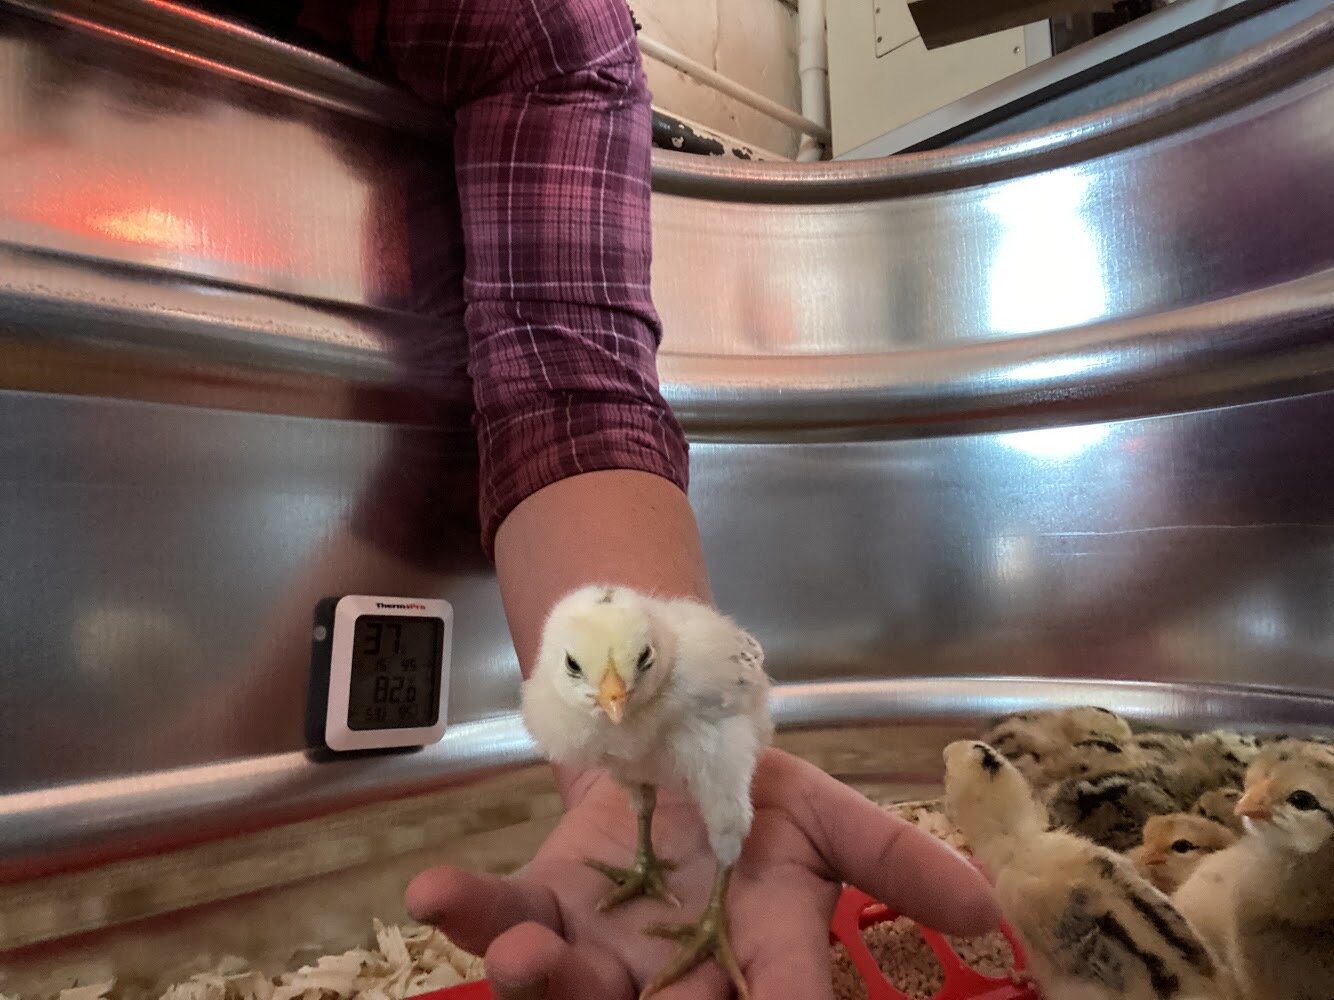  The BCCF recently acquired Shenandoah and Cub Run Creole chicks from Tangly Woods Farm in Keelzetown, VA.  